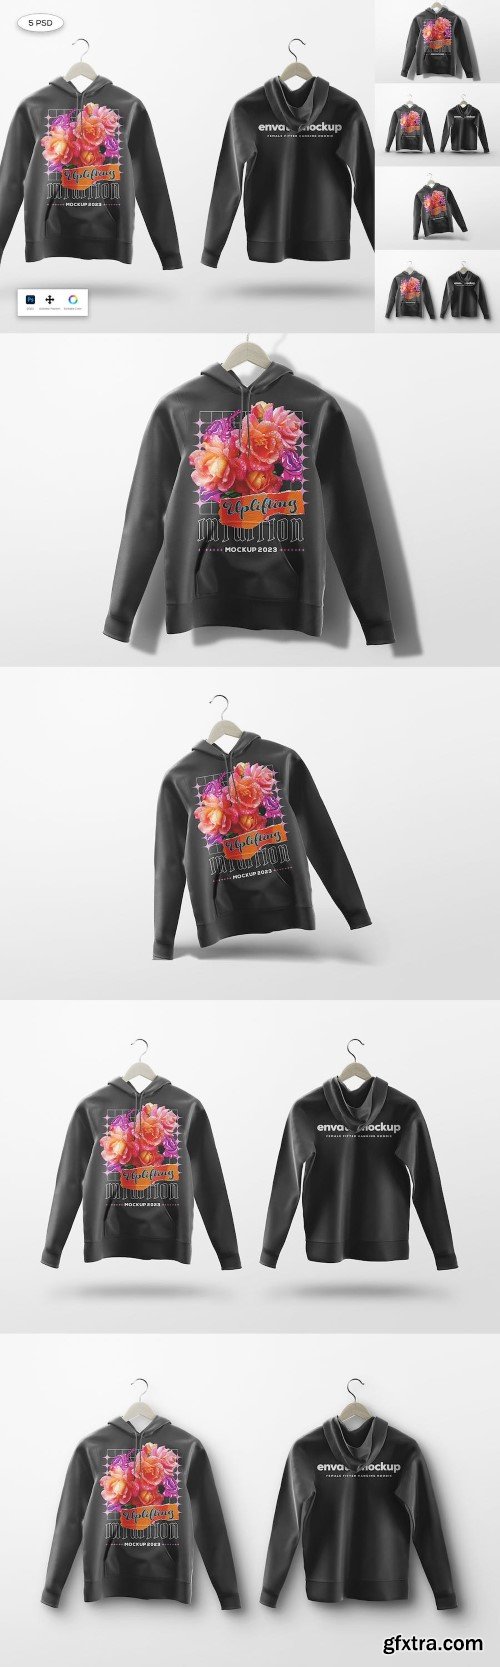 Female Fitted Hanging Hoodie Mockup